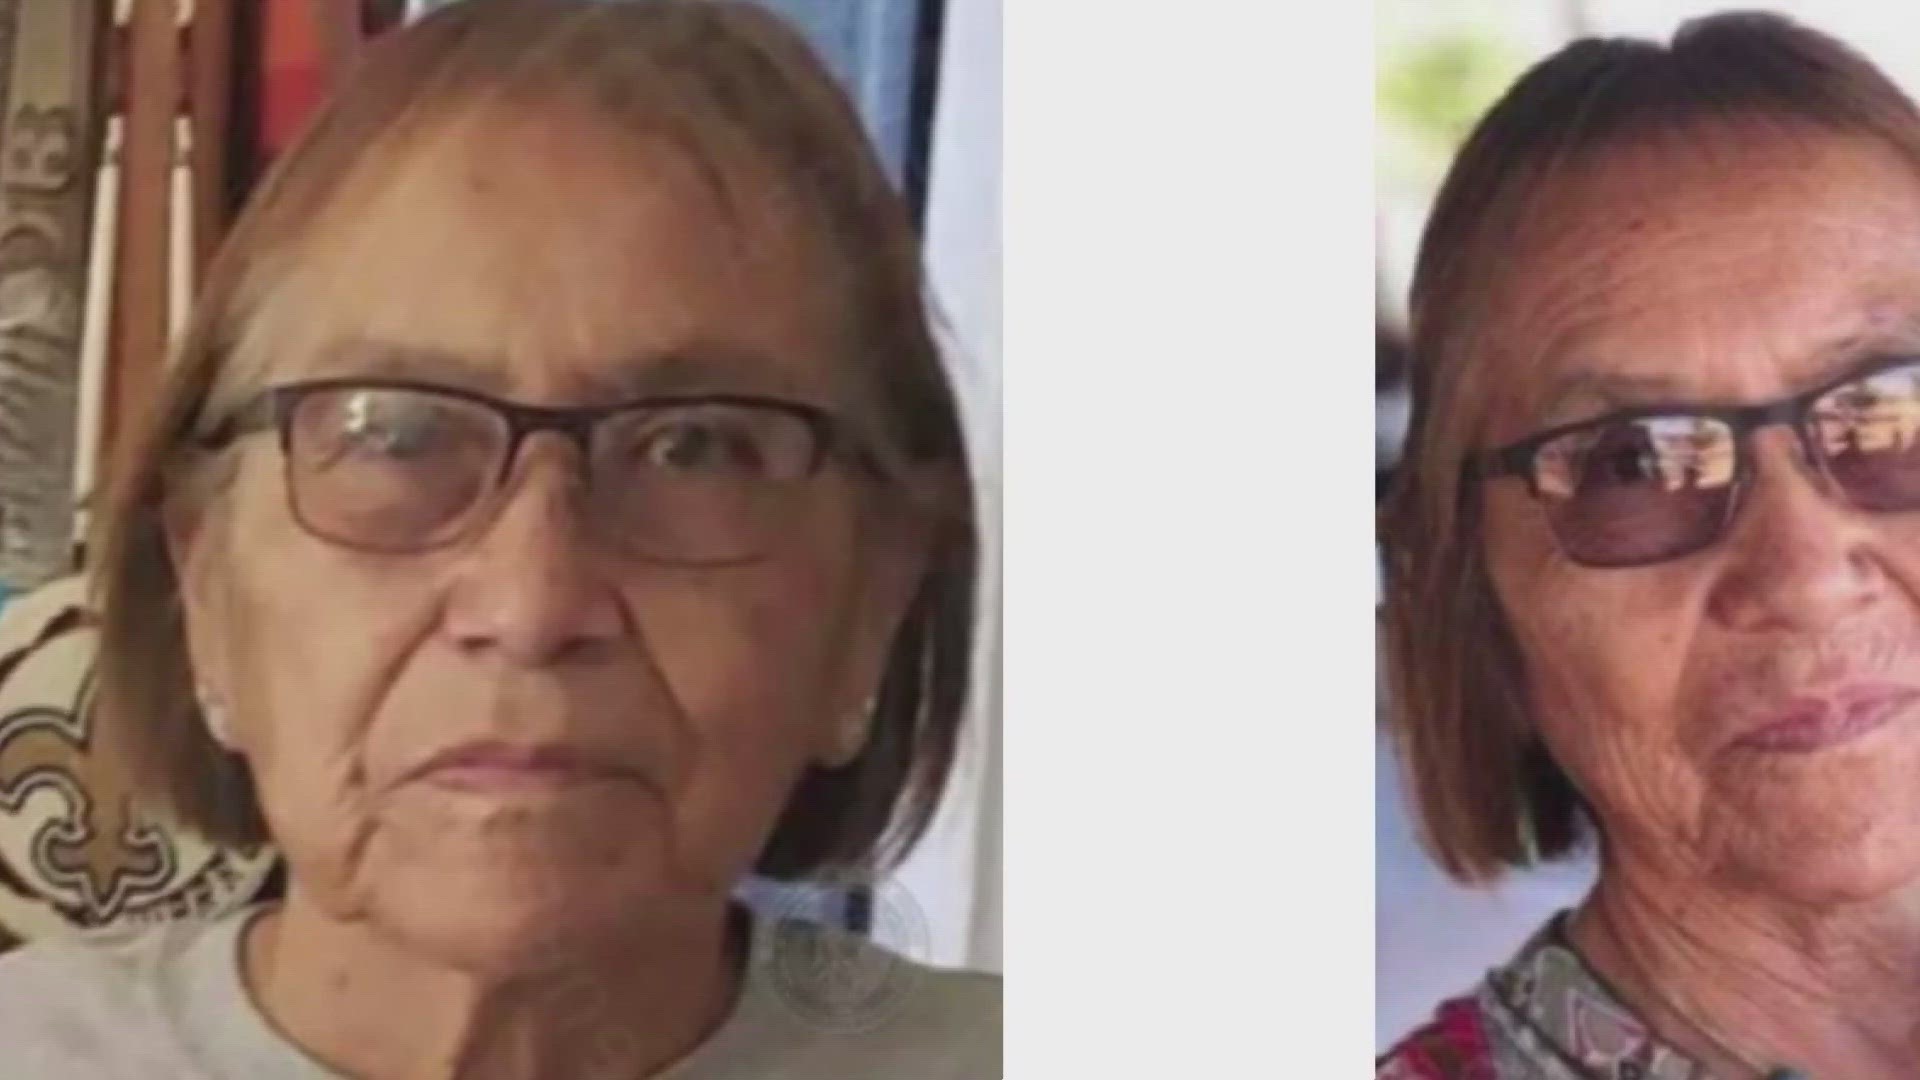 Criminal charges have been filed in Arizona that are related to the disappearance of a Navajo Nation woman in June 2021.